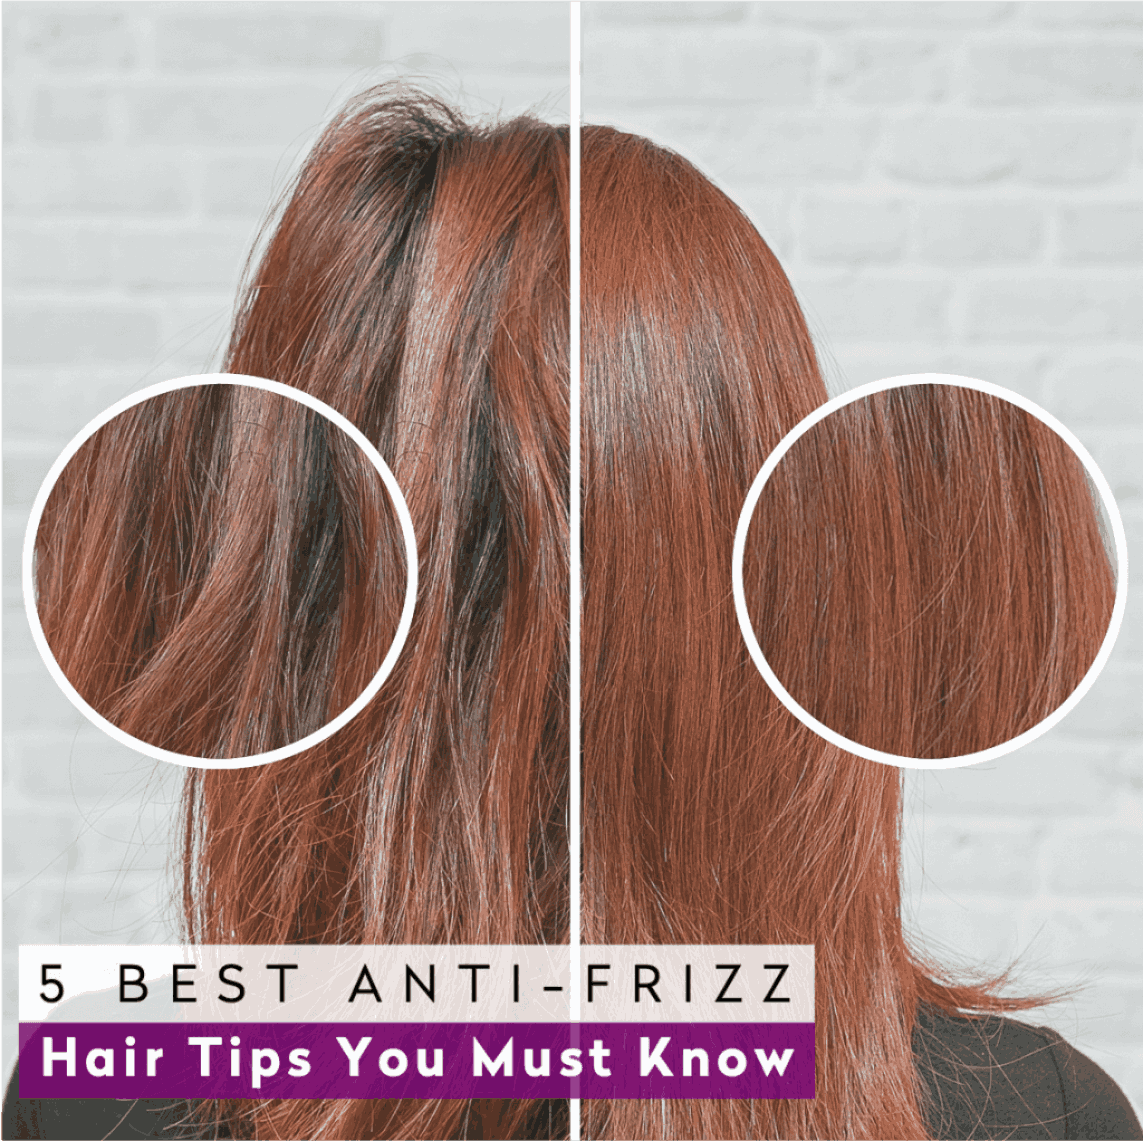 How to Make Your Hair Less Frizzy? | Anti-frizz Hair Tips You Need to Know  | Top Leading Hair Salon in Singapore and Orchard | Chez Vous